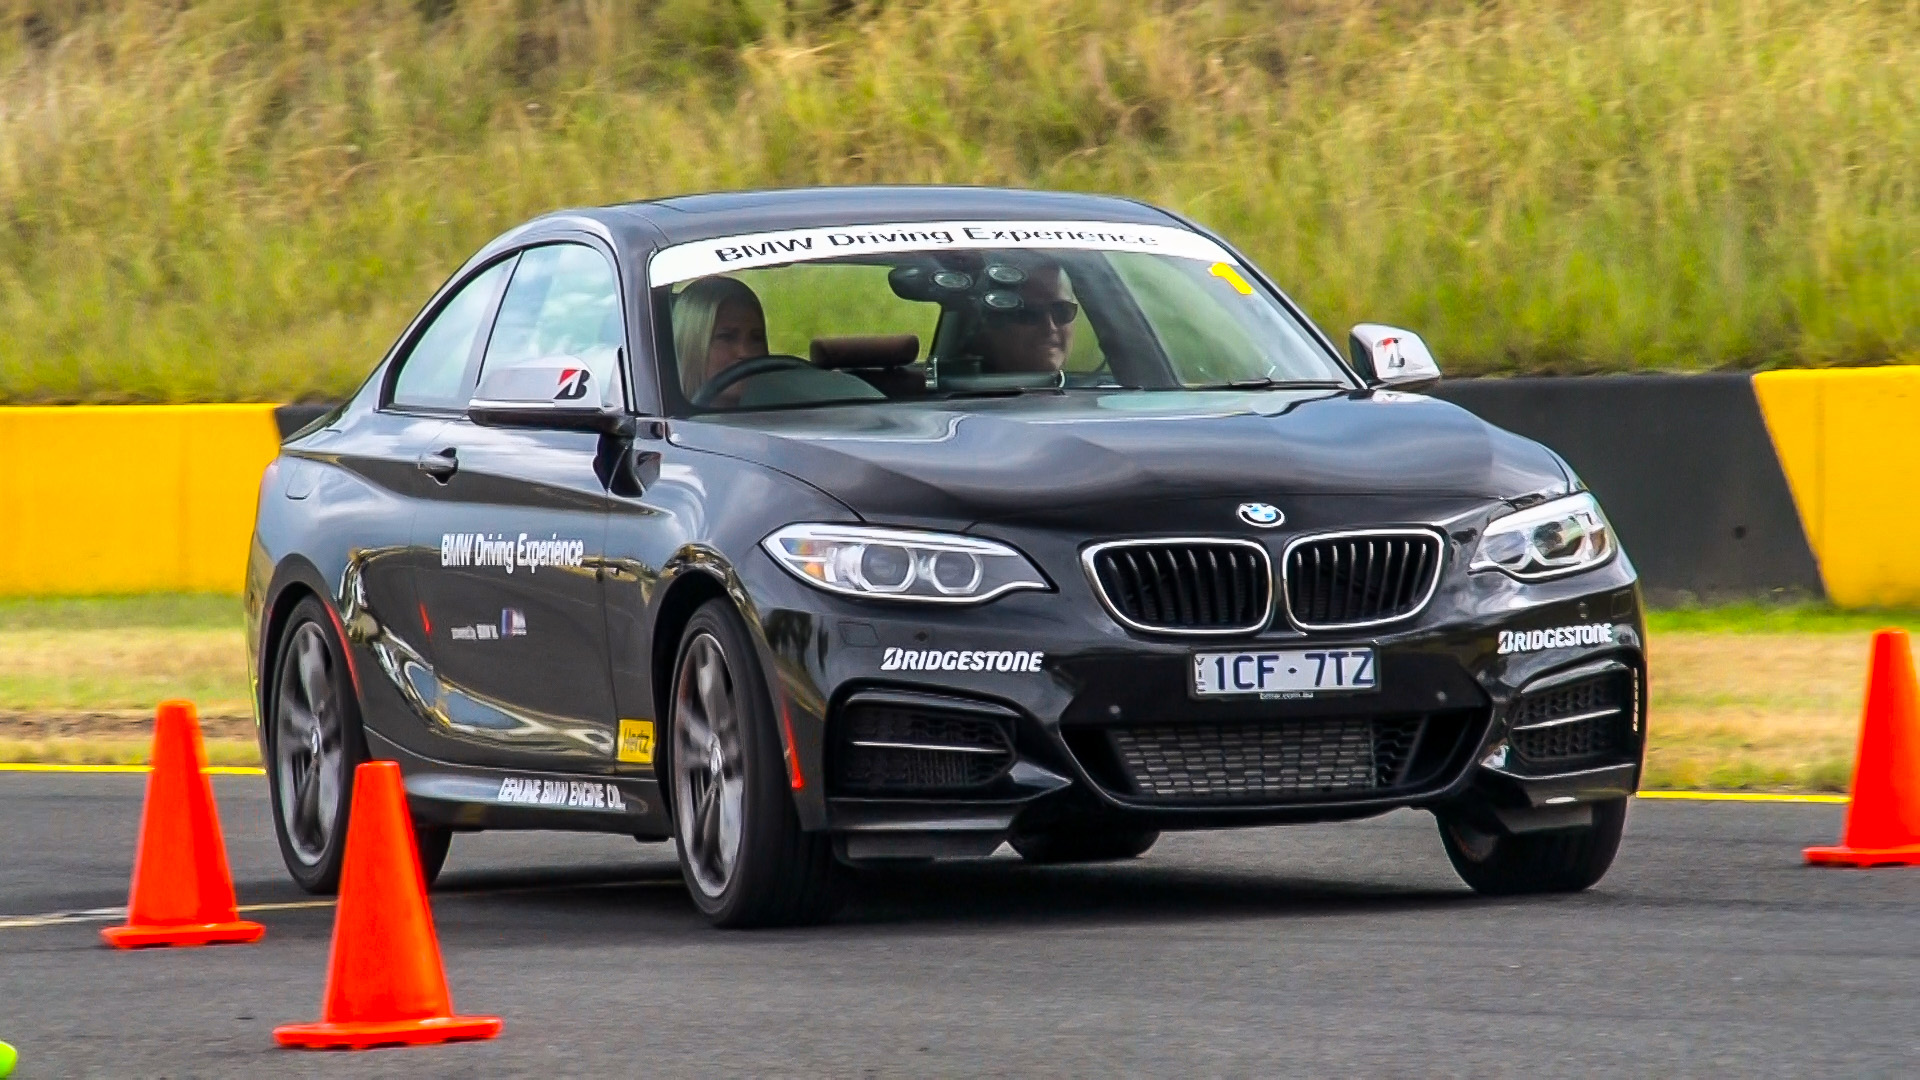 Bmw intensive driving experience #4